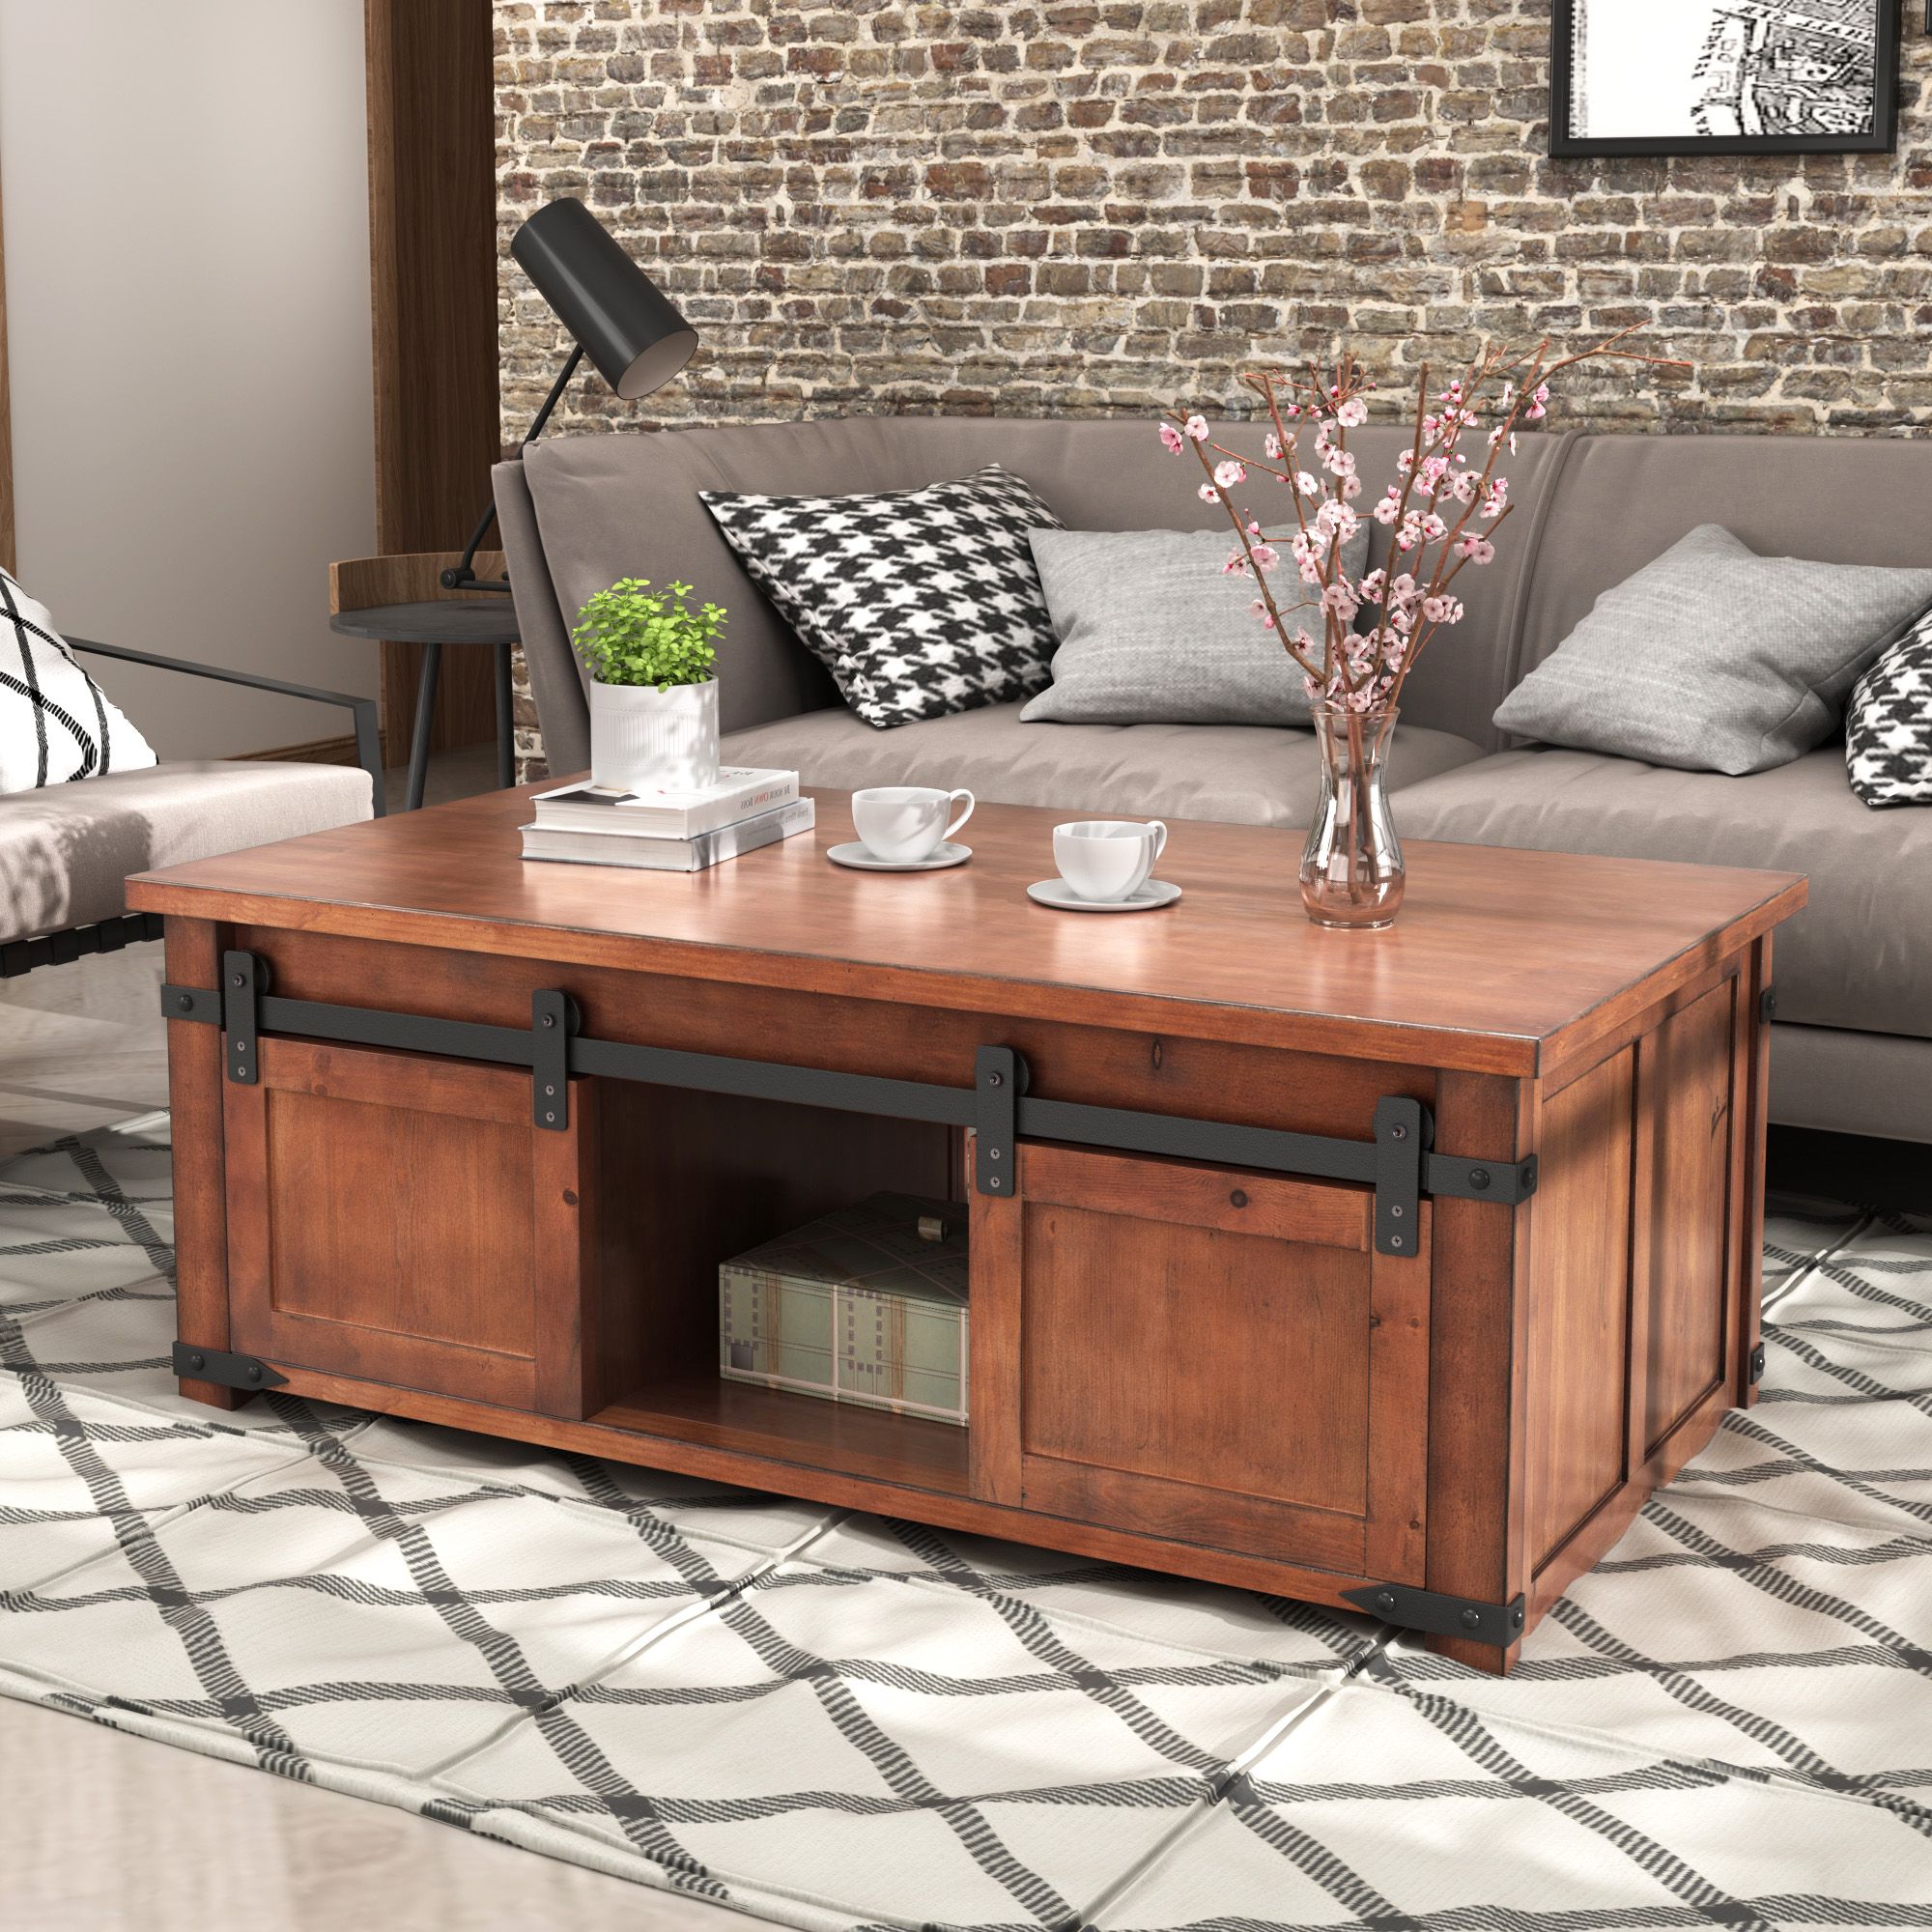 Farmhouse Coffee Table, Coffee Table With Storage Shelf With Regard To Widely Used Black Wood Storage Coffee Tables (View 6 of 20)